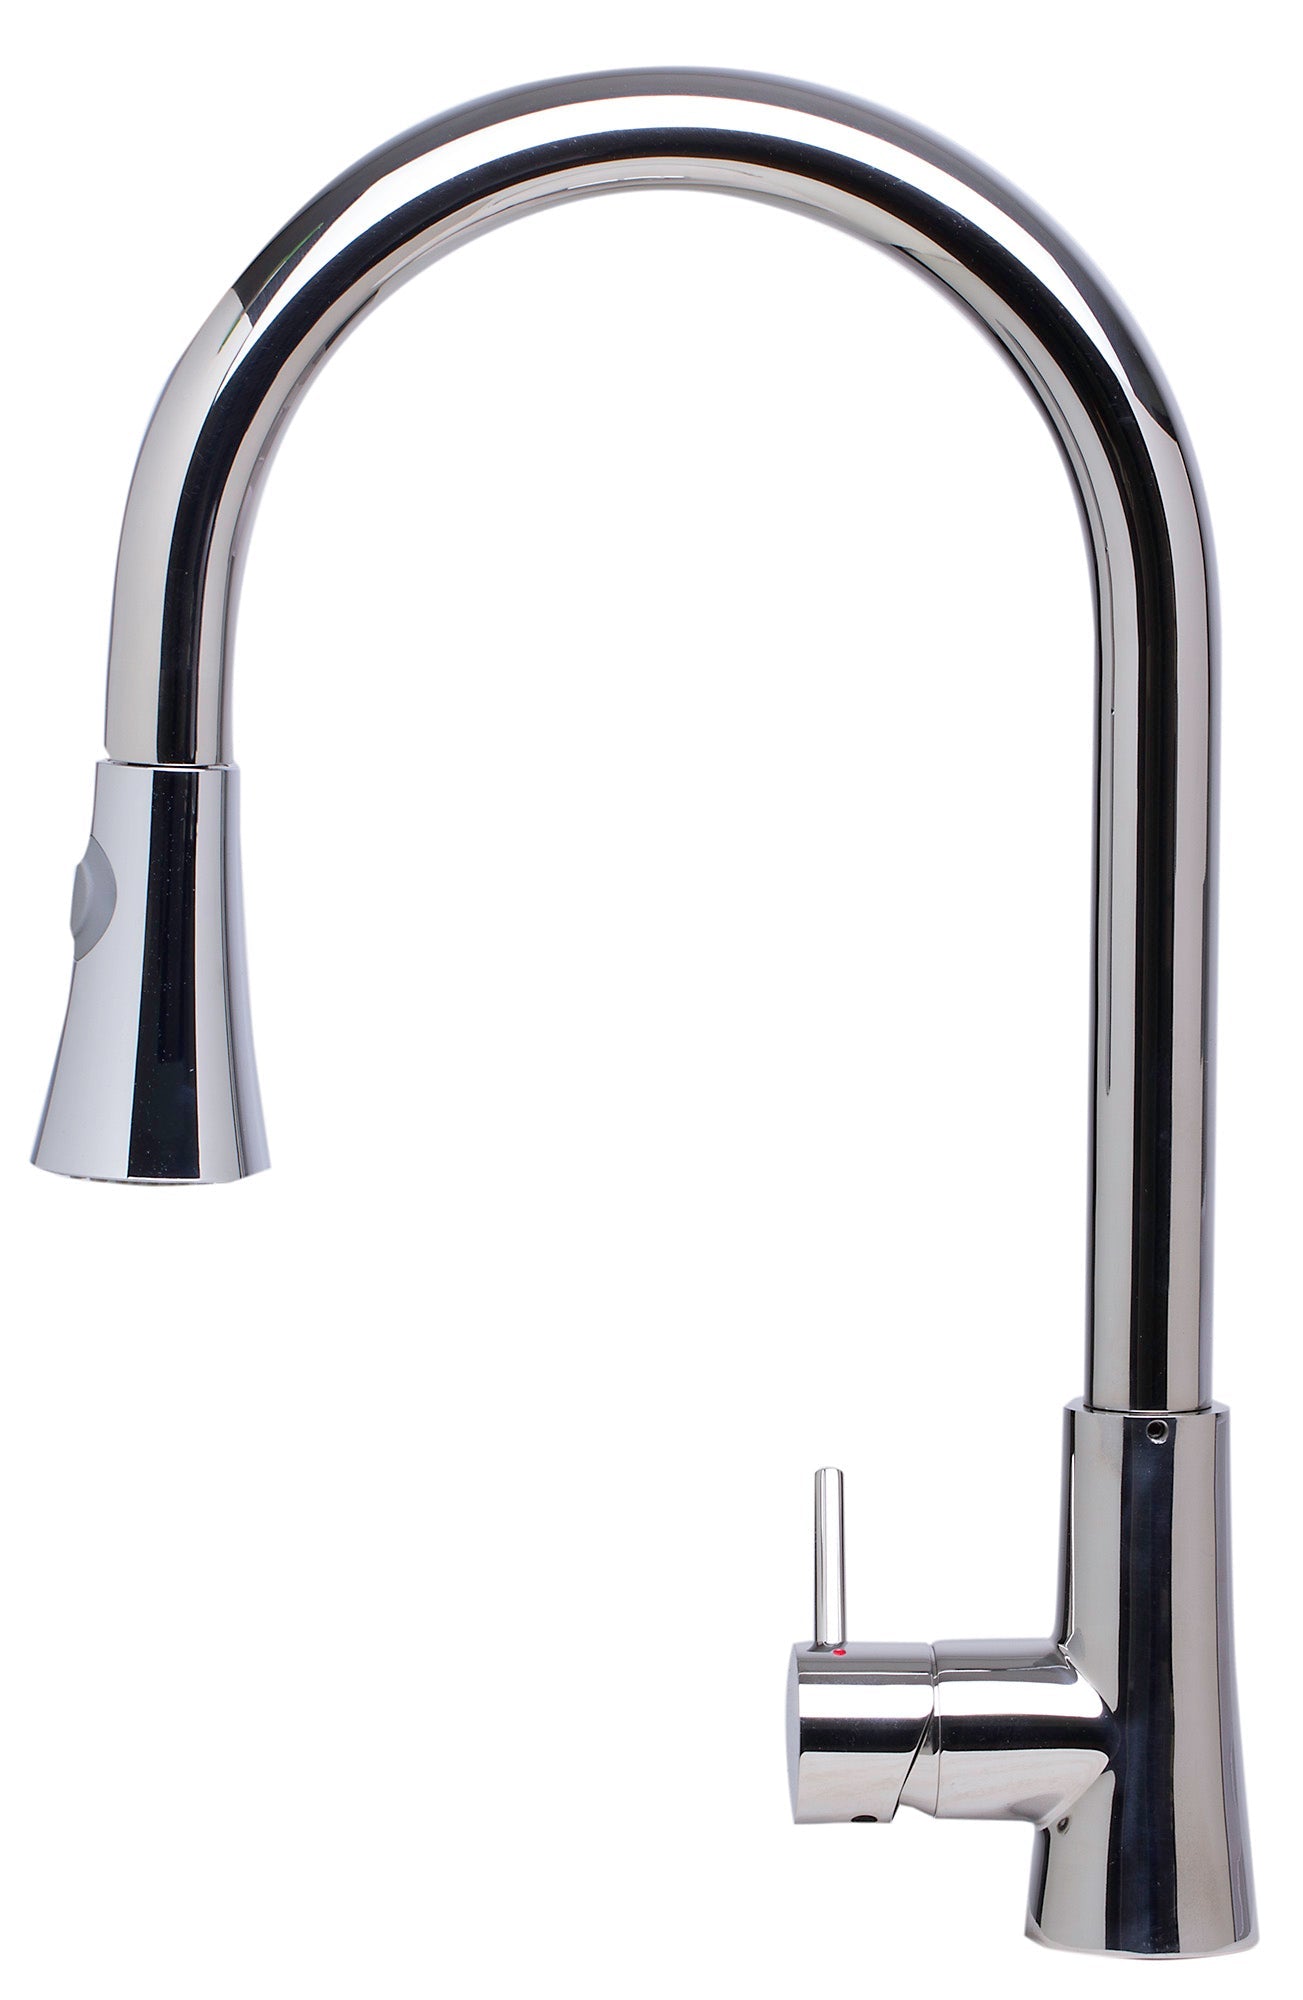 Alfi brand AB2034 Stainless Steel Pull Down Single Hole Kitchen Faucet